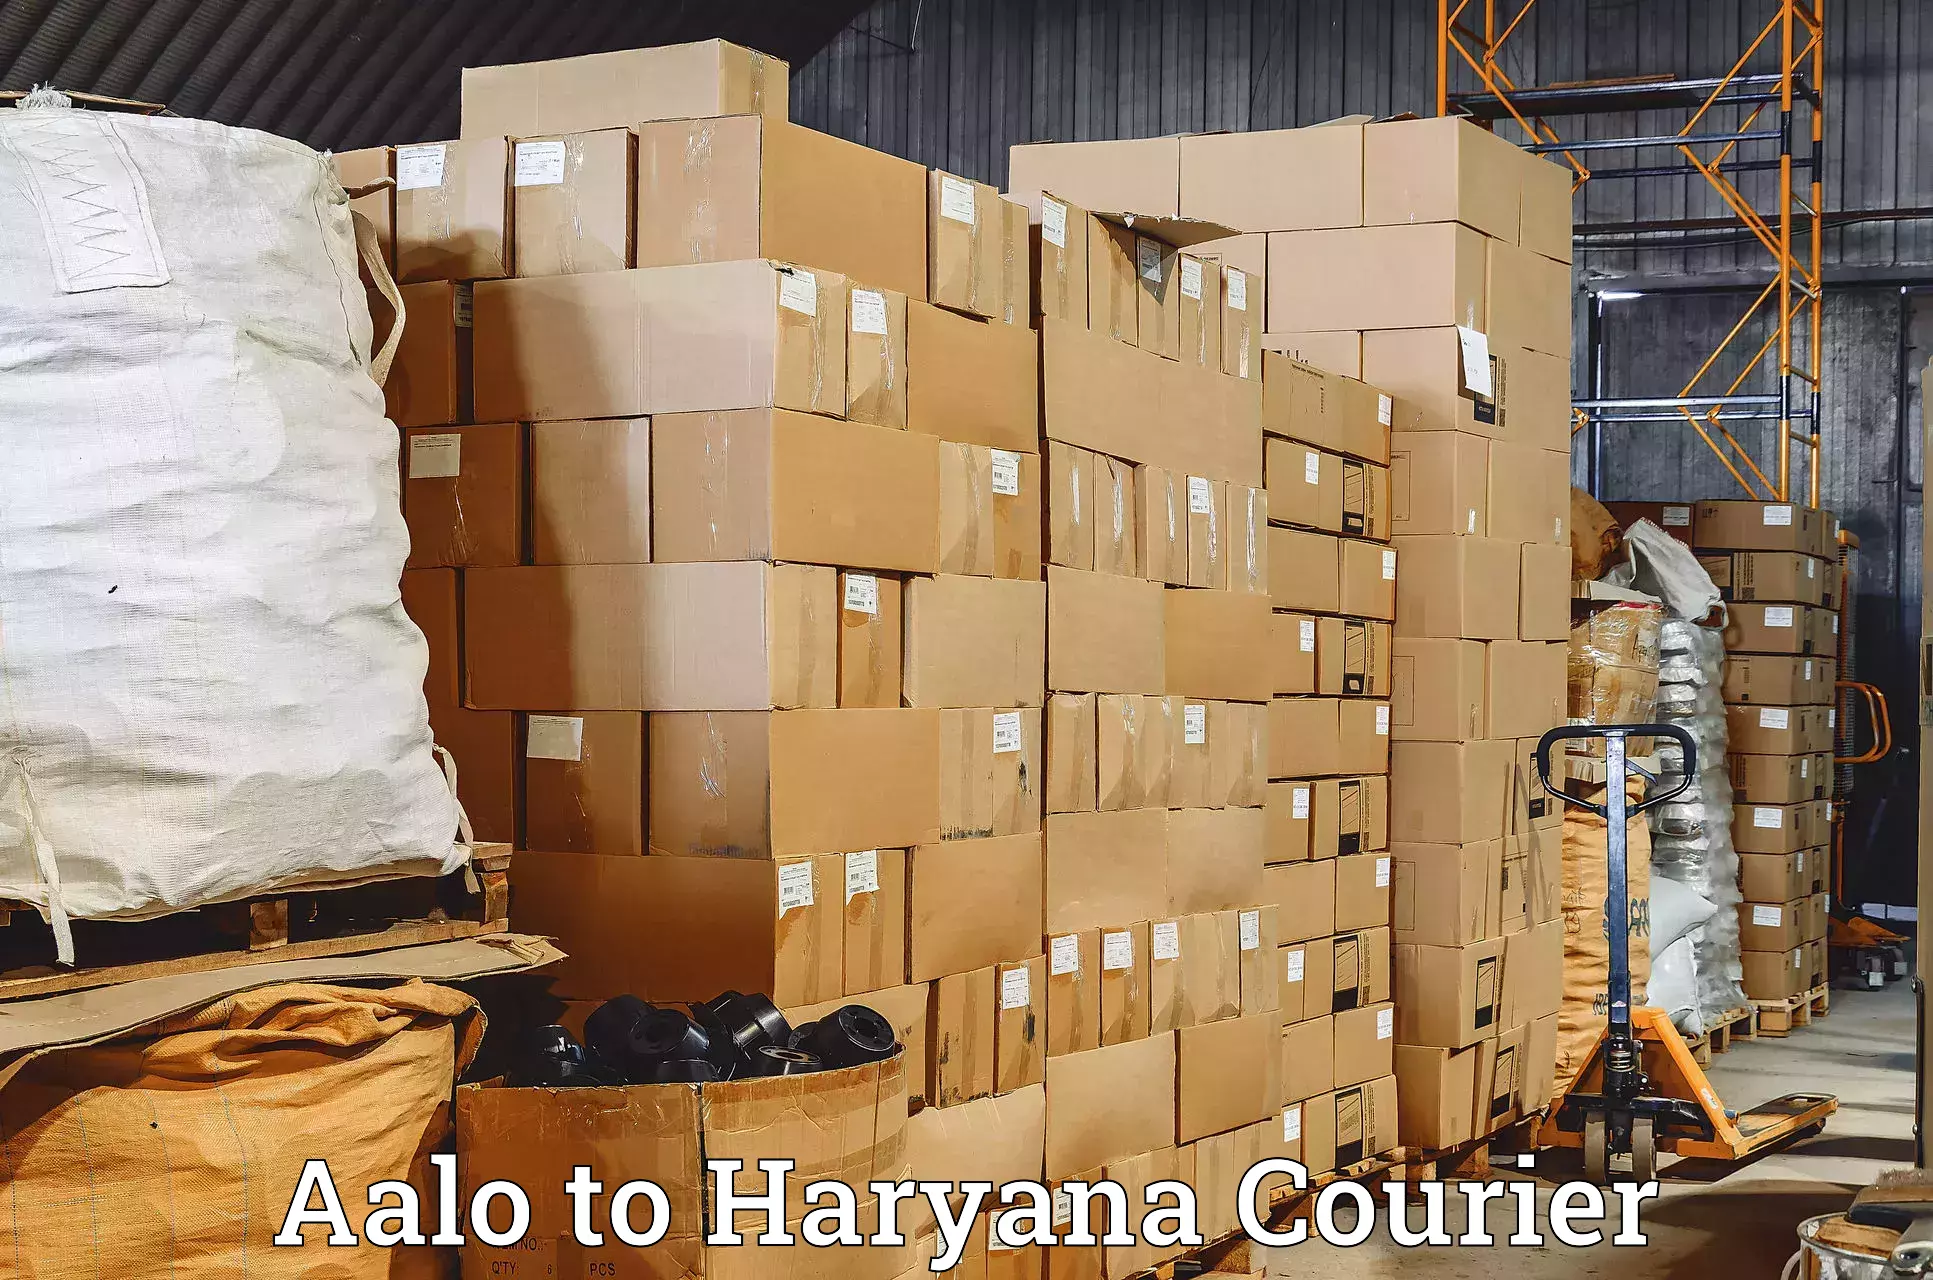 Express delivery network Aalo to NCR Haryana